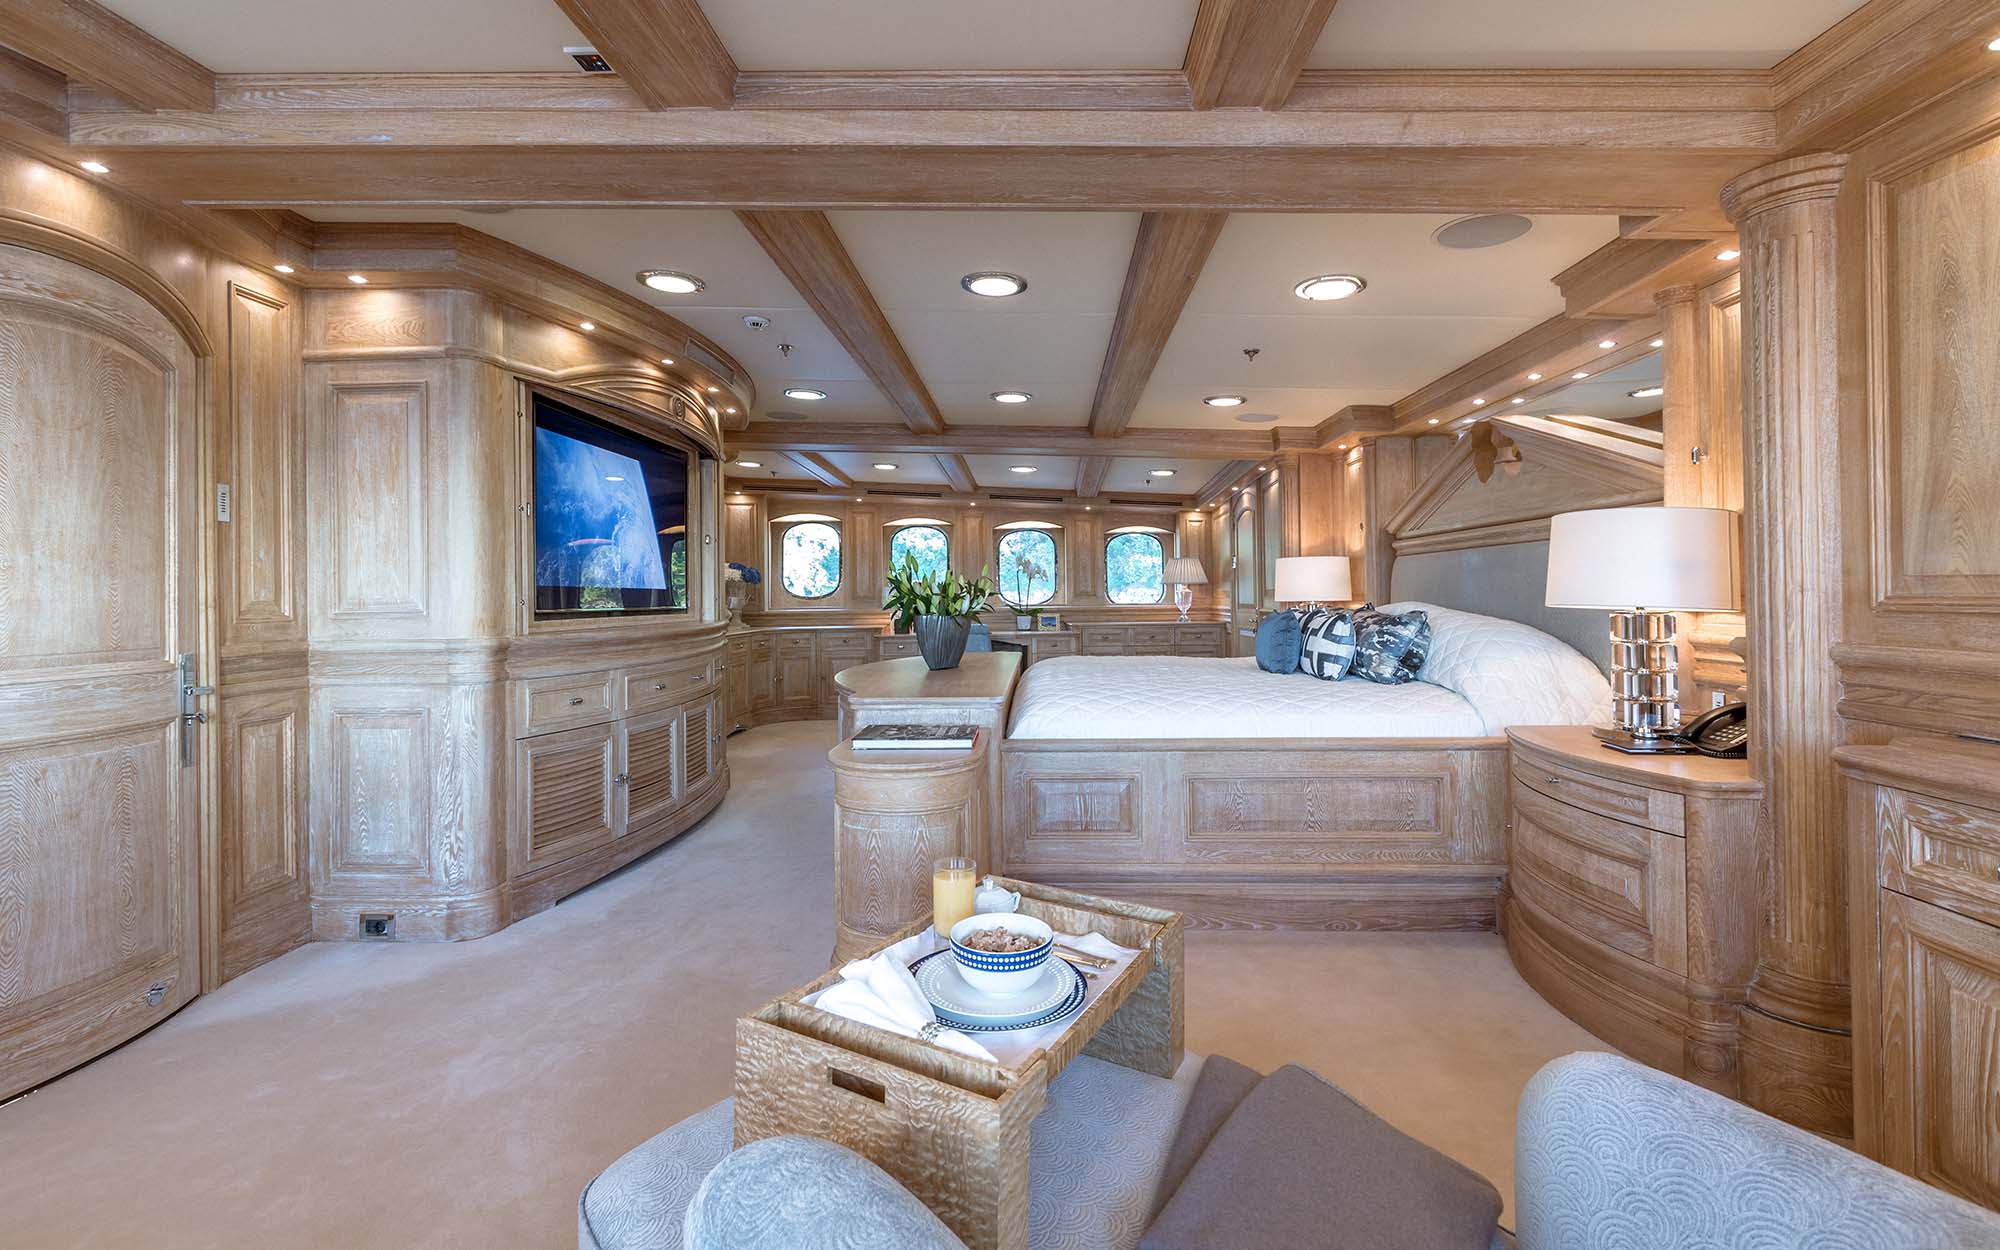 NERO Yacht master suite with built-in flat-screen television